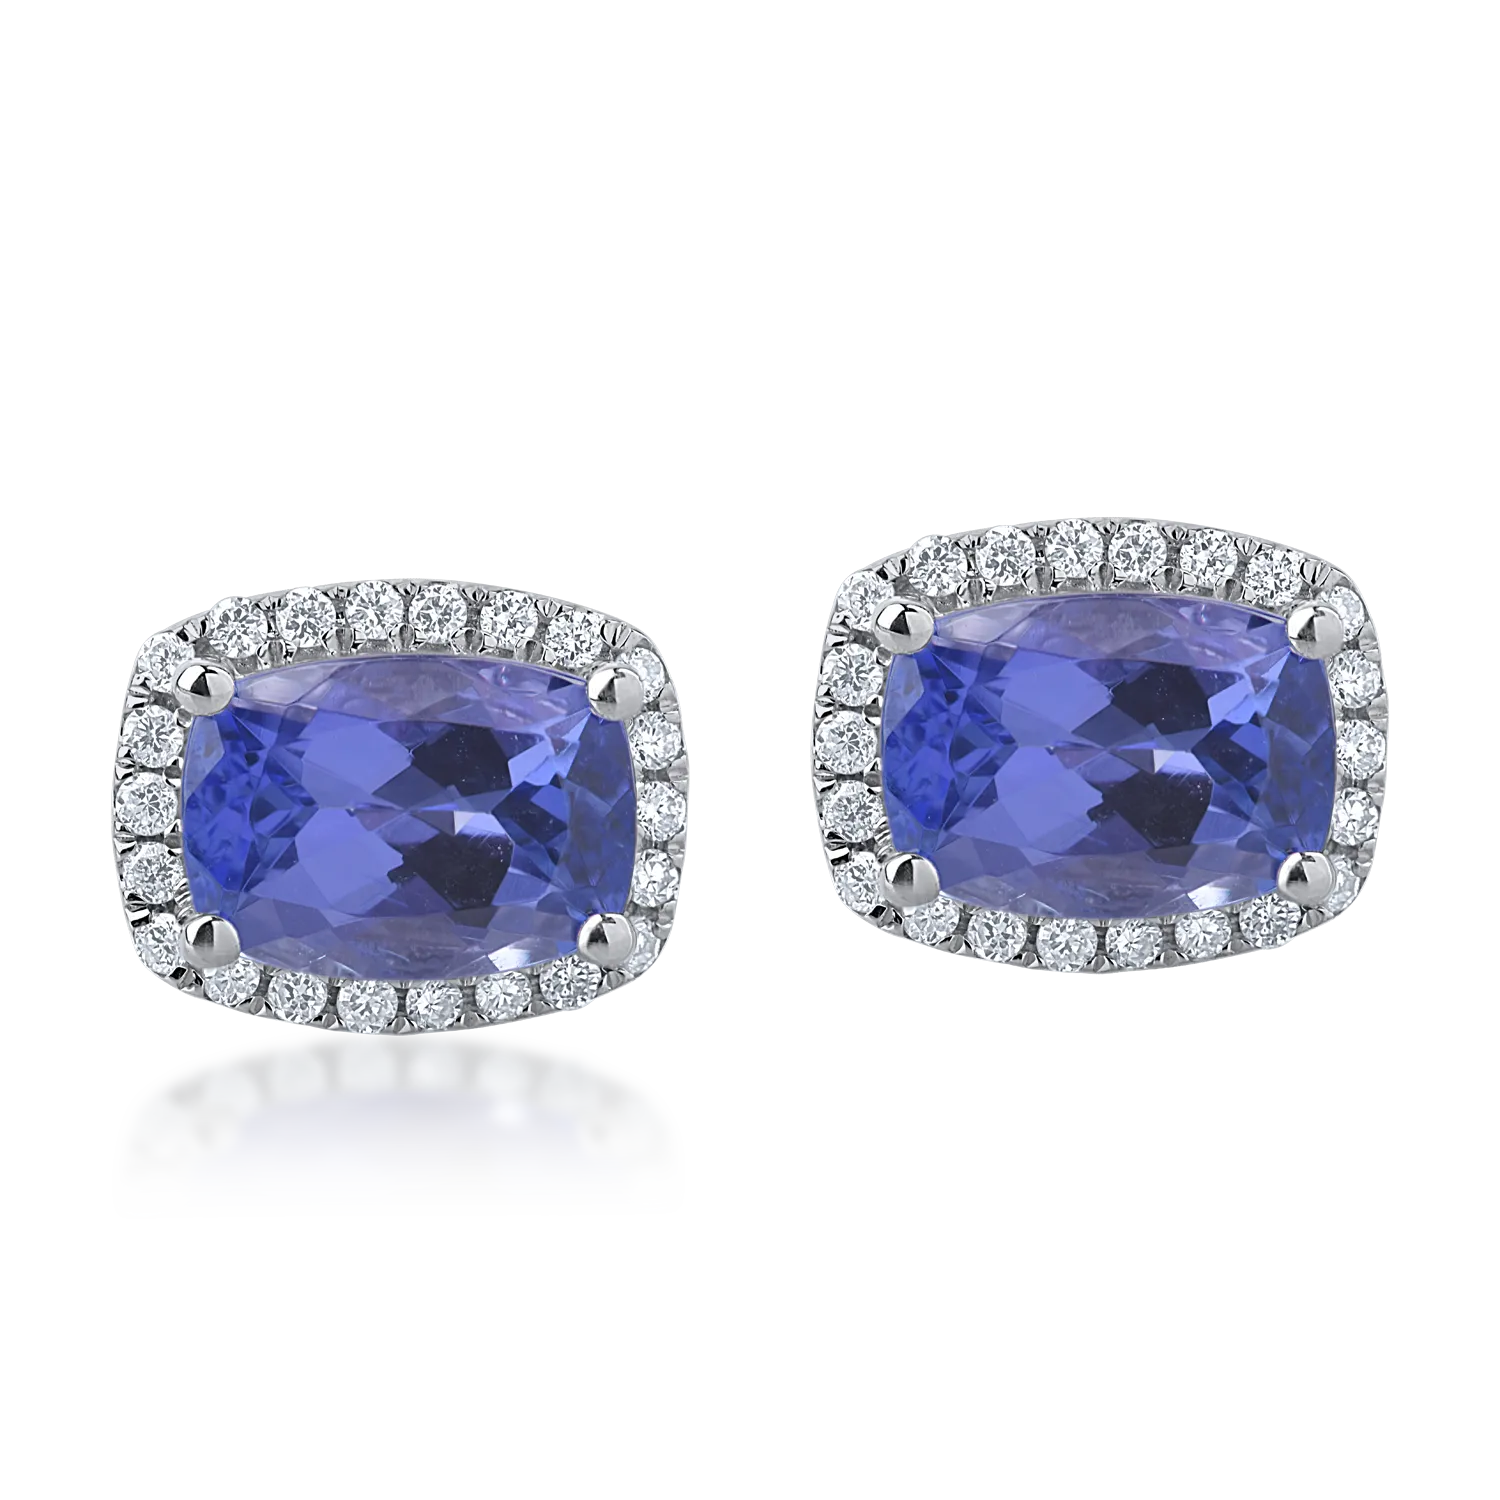 White gold earrings with 2.06ct tanzanites and 0.16ct diamonds